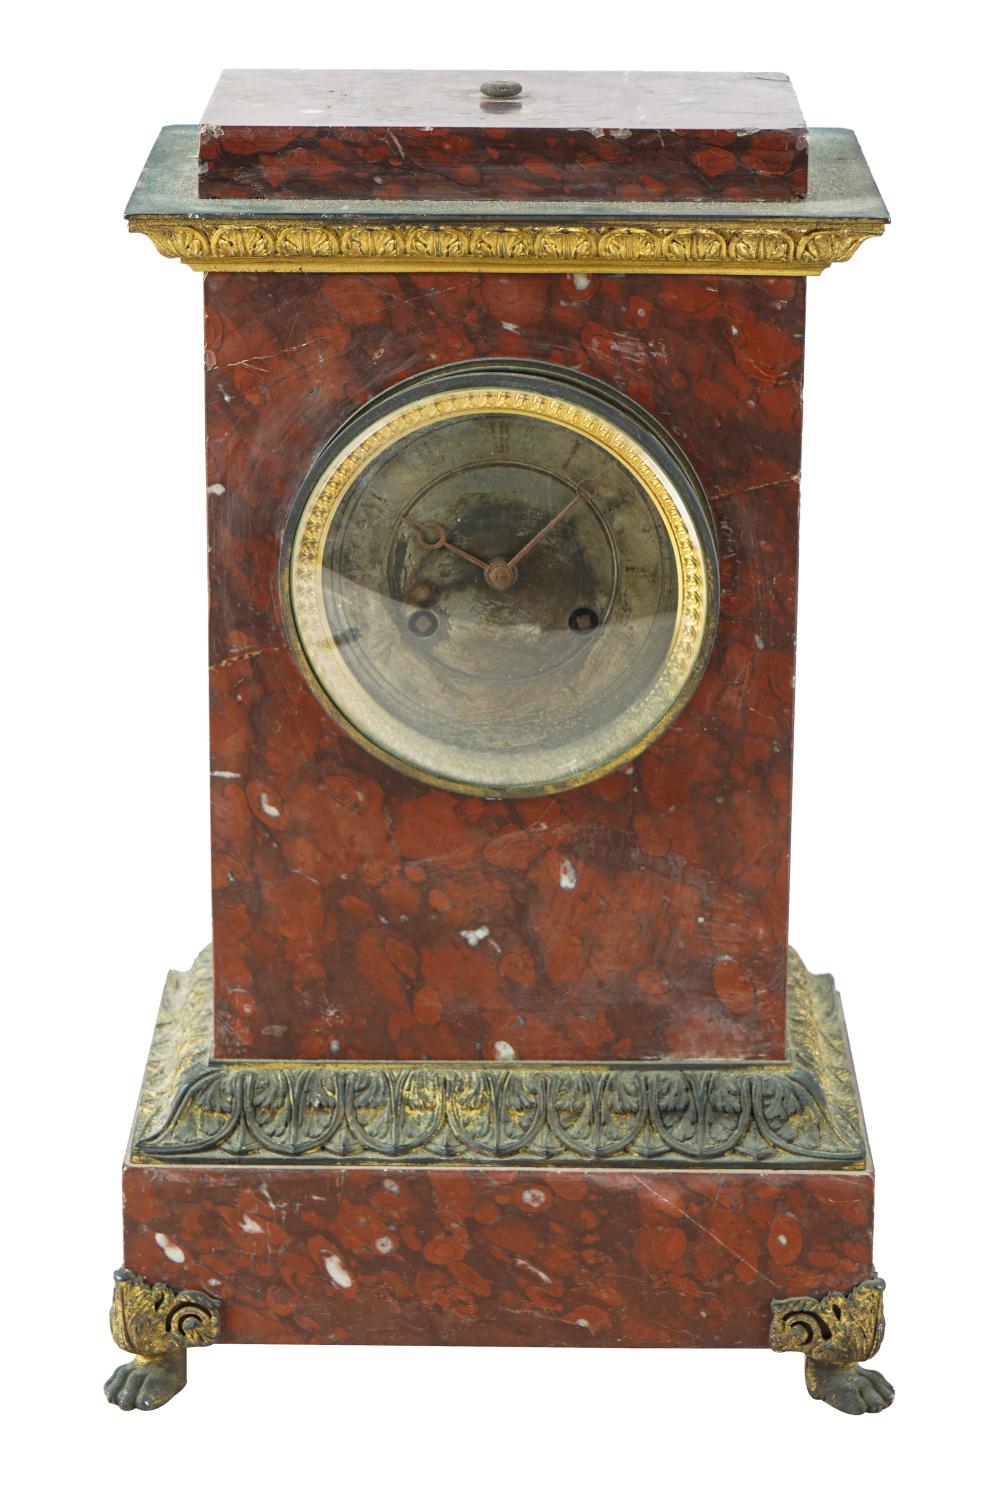 ROUGE MARBLE MANTEL CLOCKthe movement 332bc1